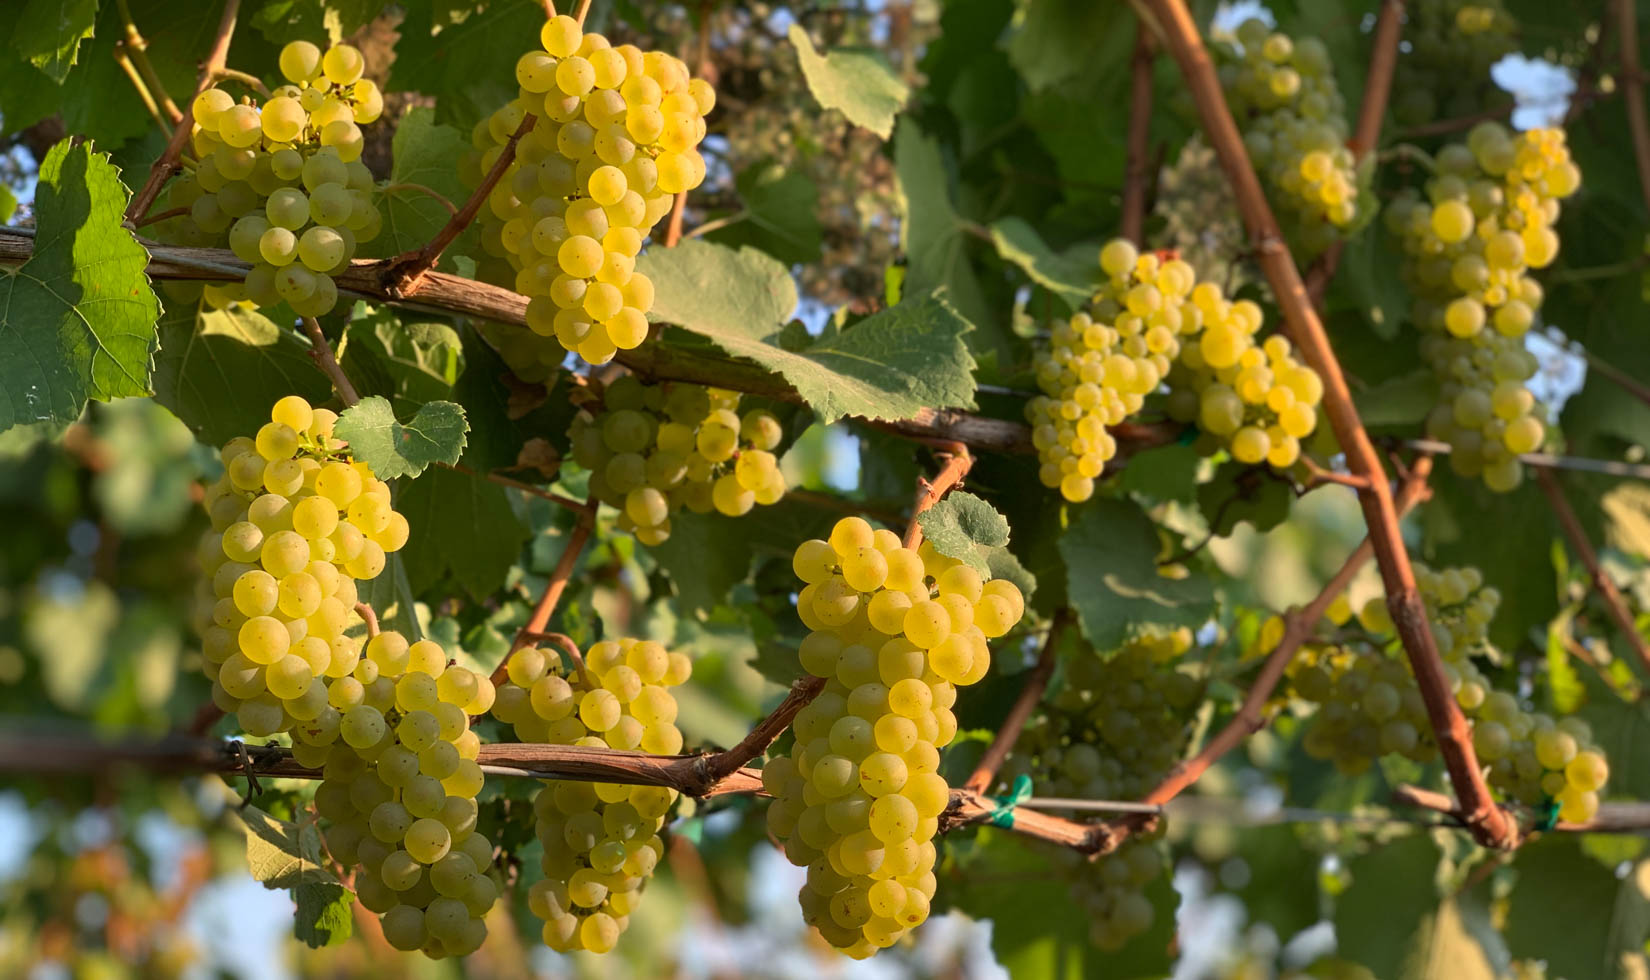 How Sonoma Winemakers Made Great Chardonnay in 2020